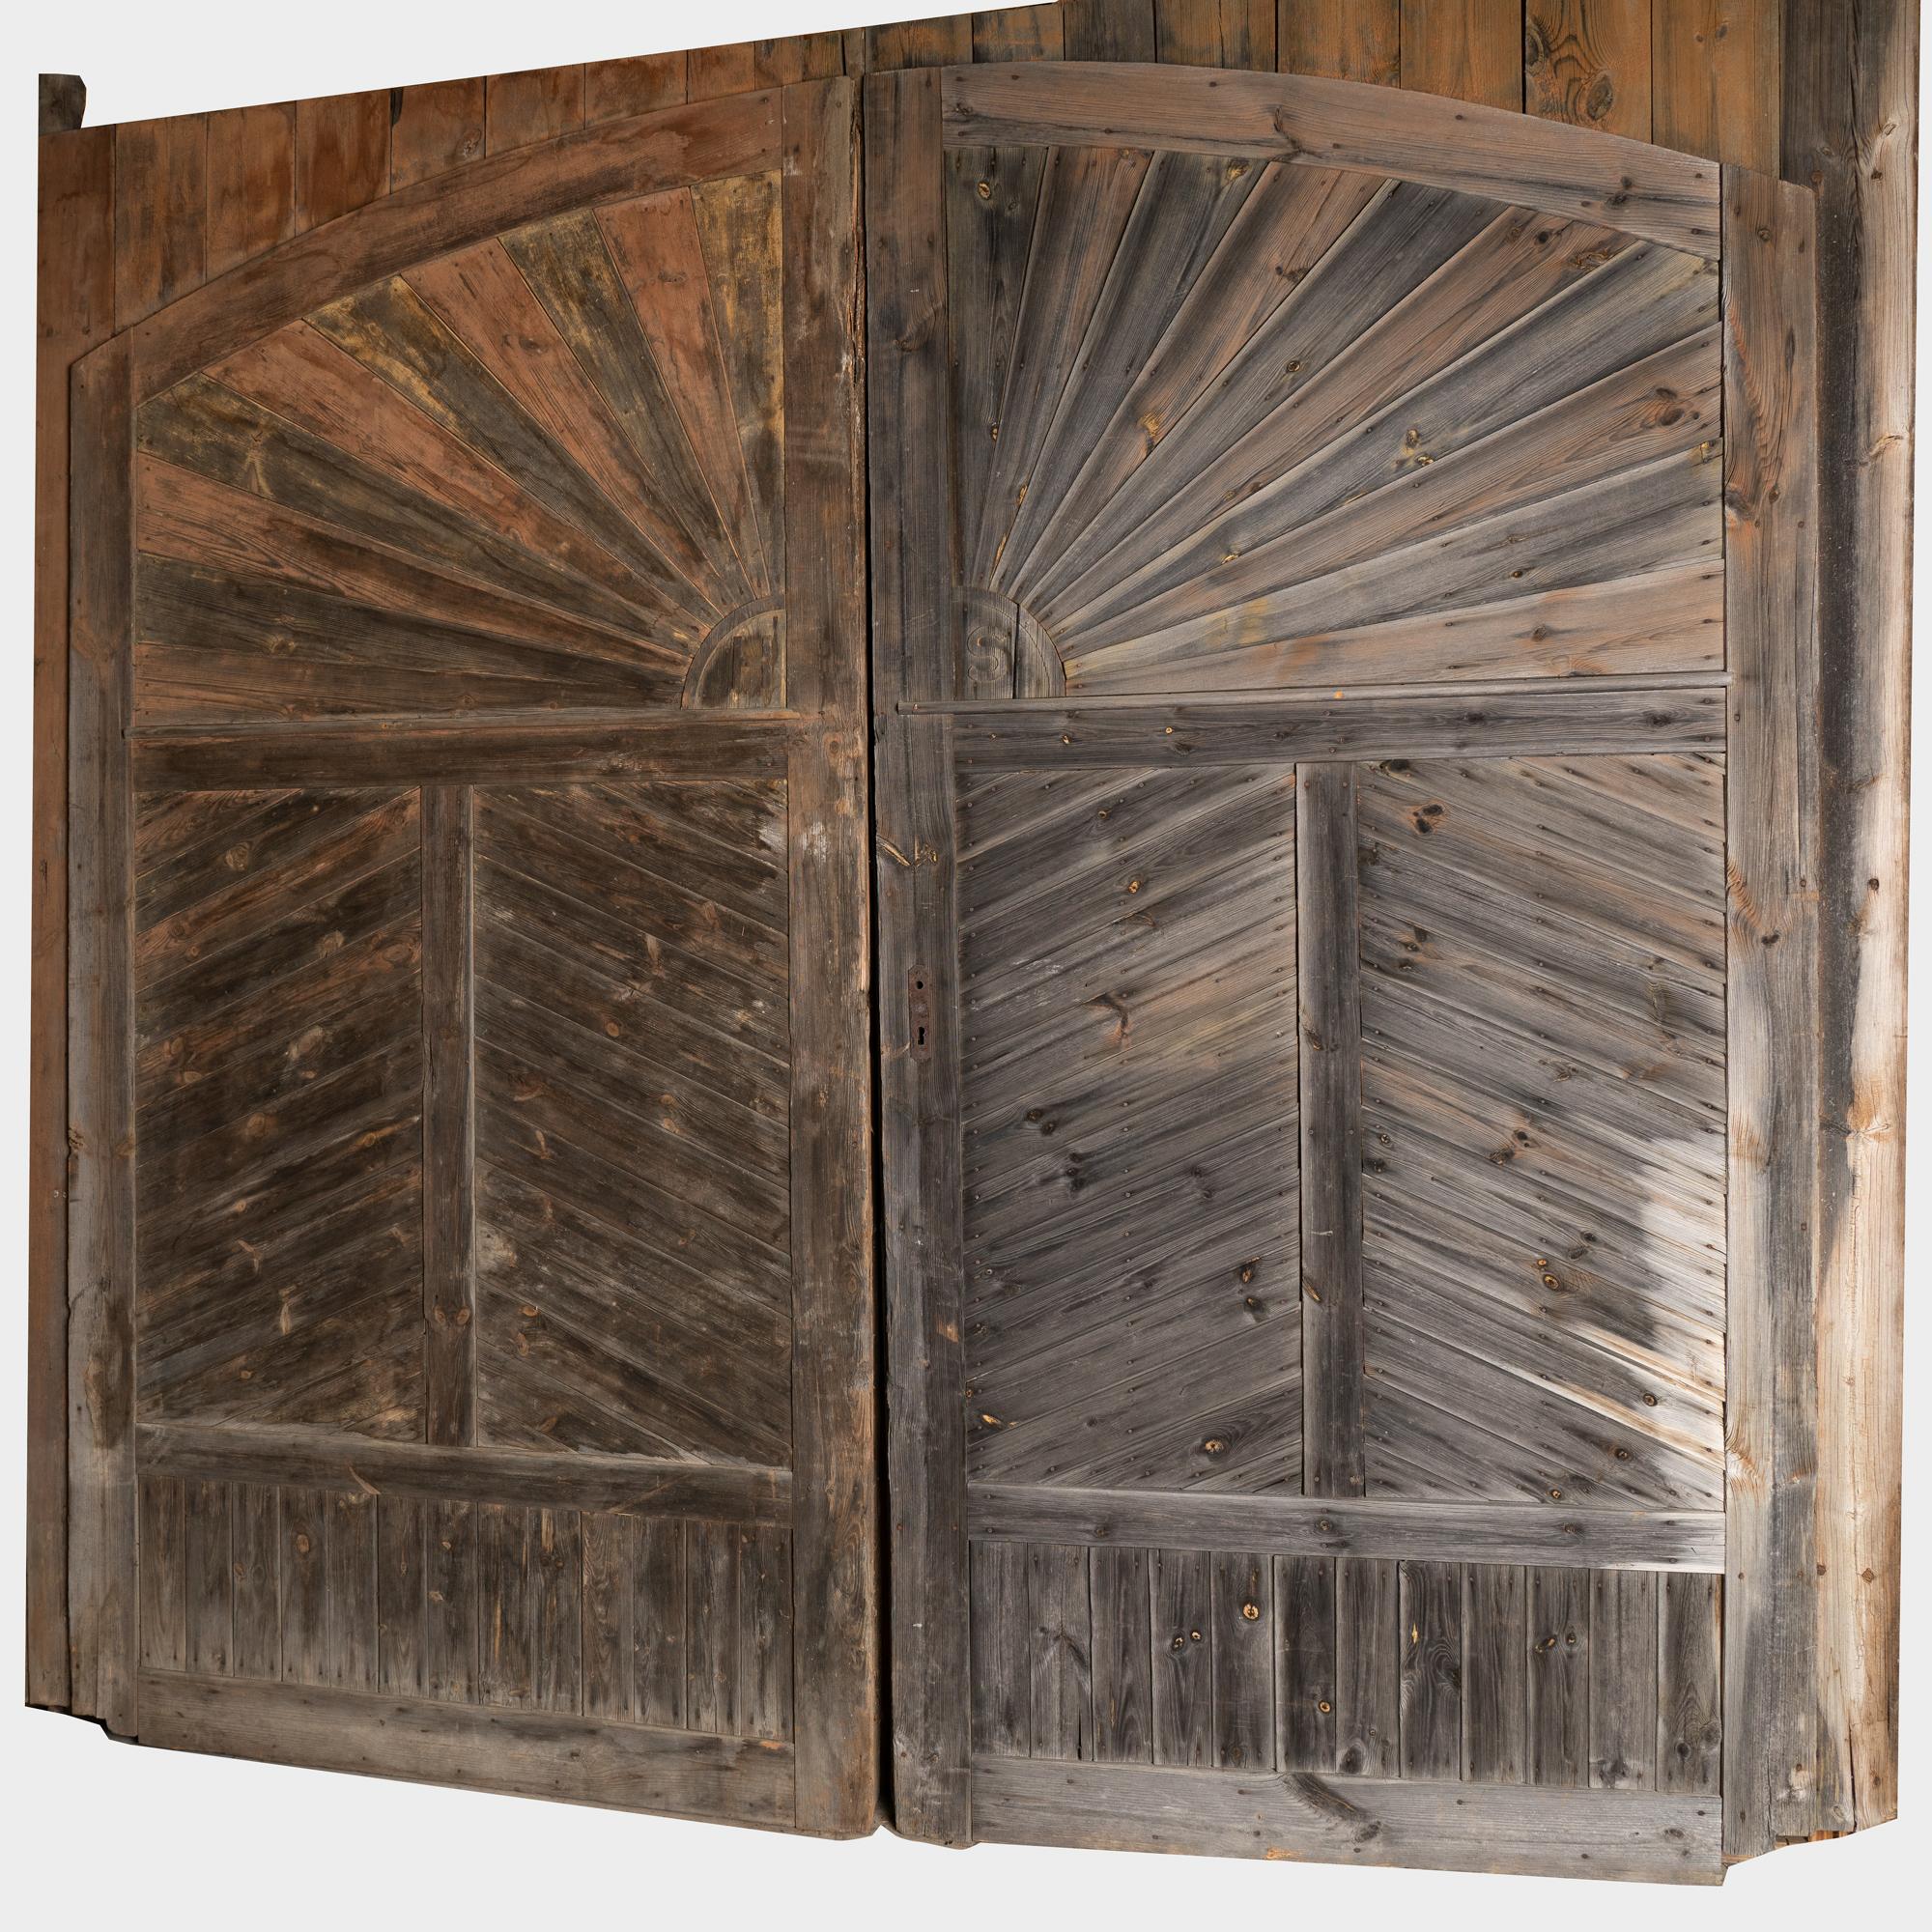 Rustic Huge Architectural Salvaged Barn Doors With Sunburst, Hungary circa 1840-60